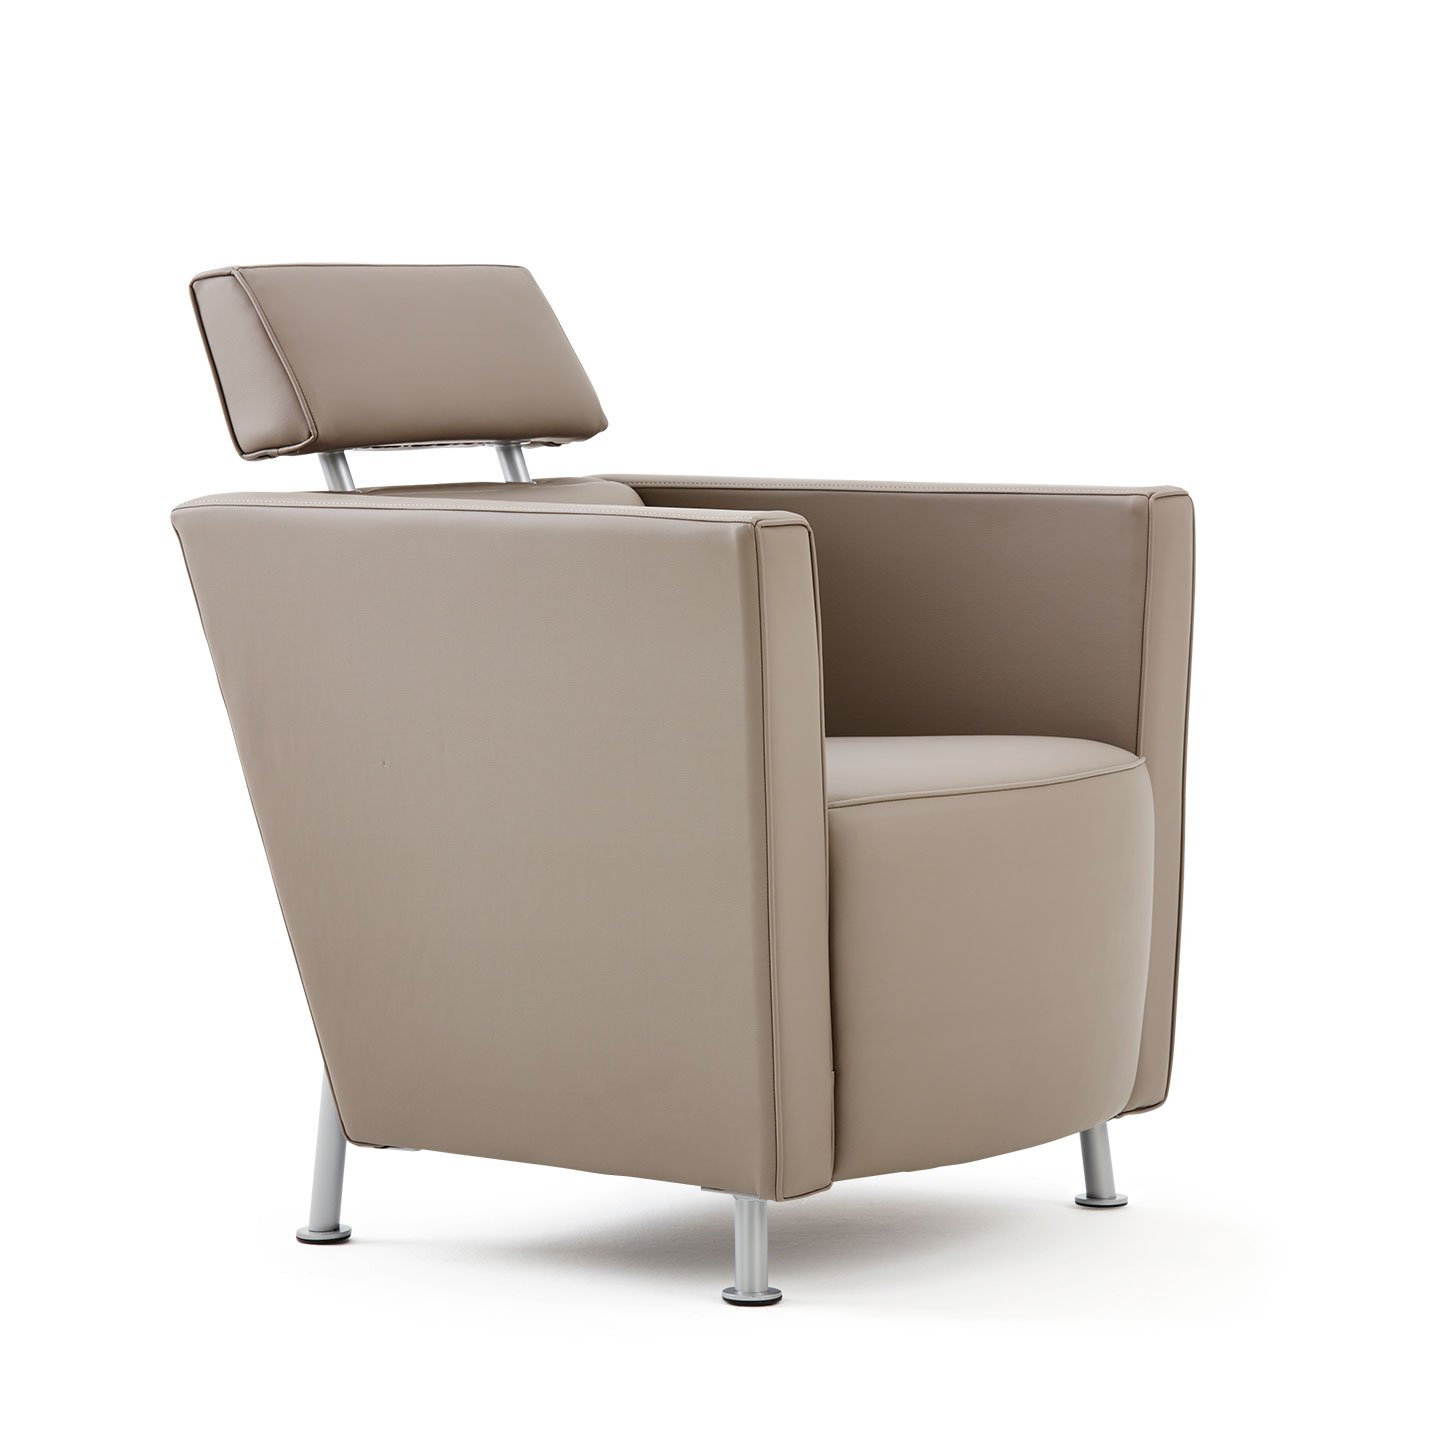 Haworth Hello lounge chair in grey leather upholstery at an angle